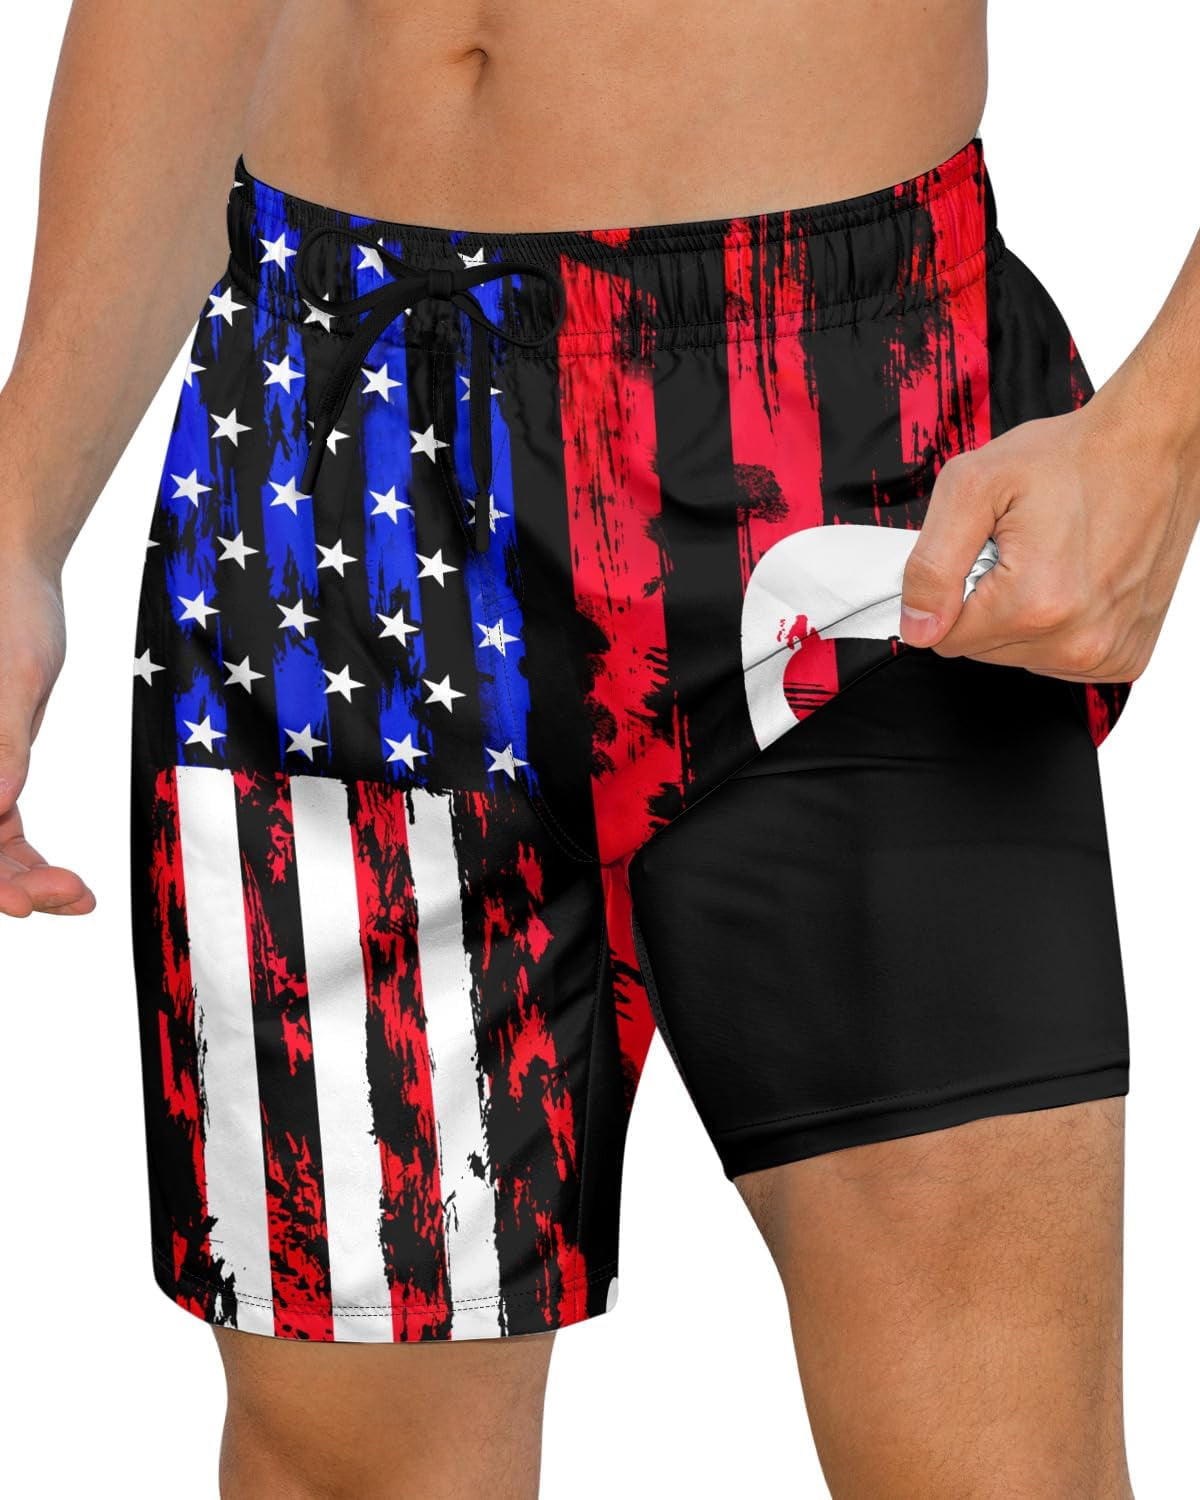 Axwujok Mens Swimming Trunks with Compression Liner Swim Shorts 7 inch ...